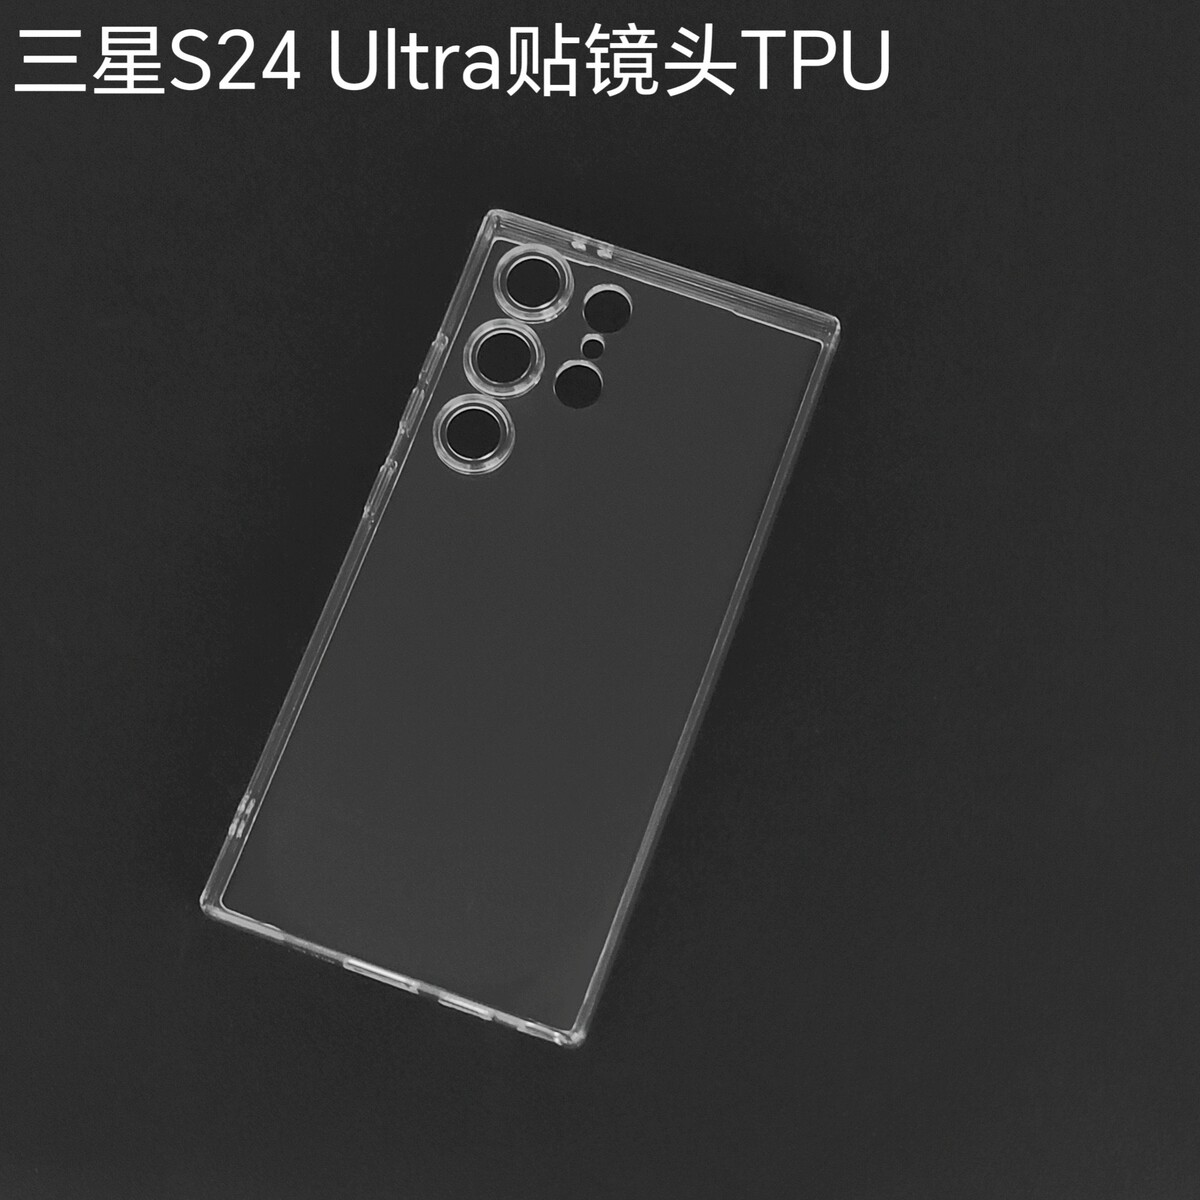 Samsung Galaxy S24 Ultra: Leaker shows early case design of probable 200 MP  ISOCELL Zoom Anyplace smartphone -  News